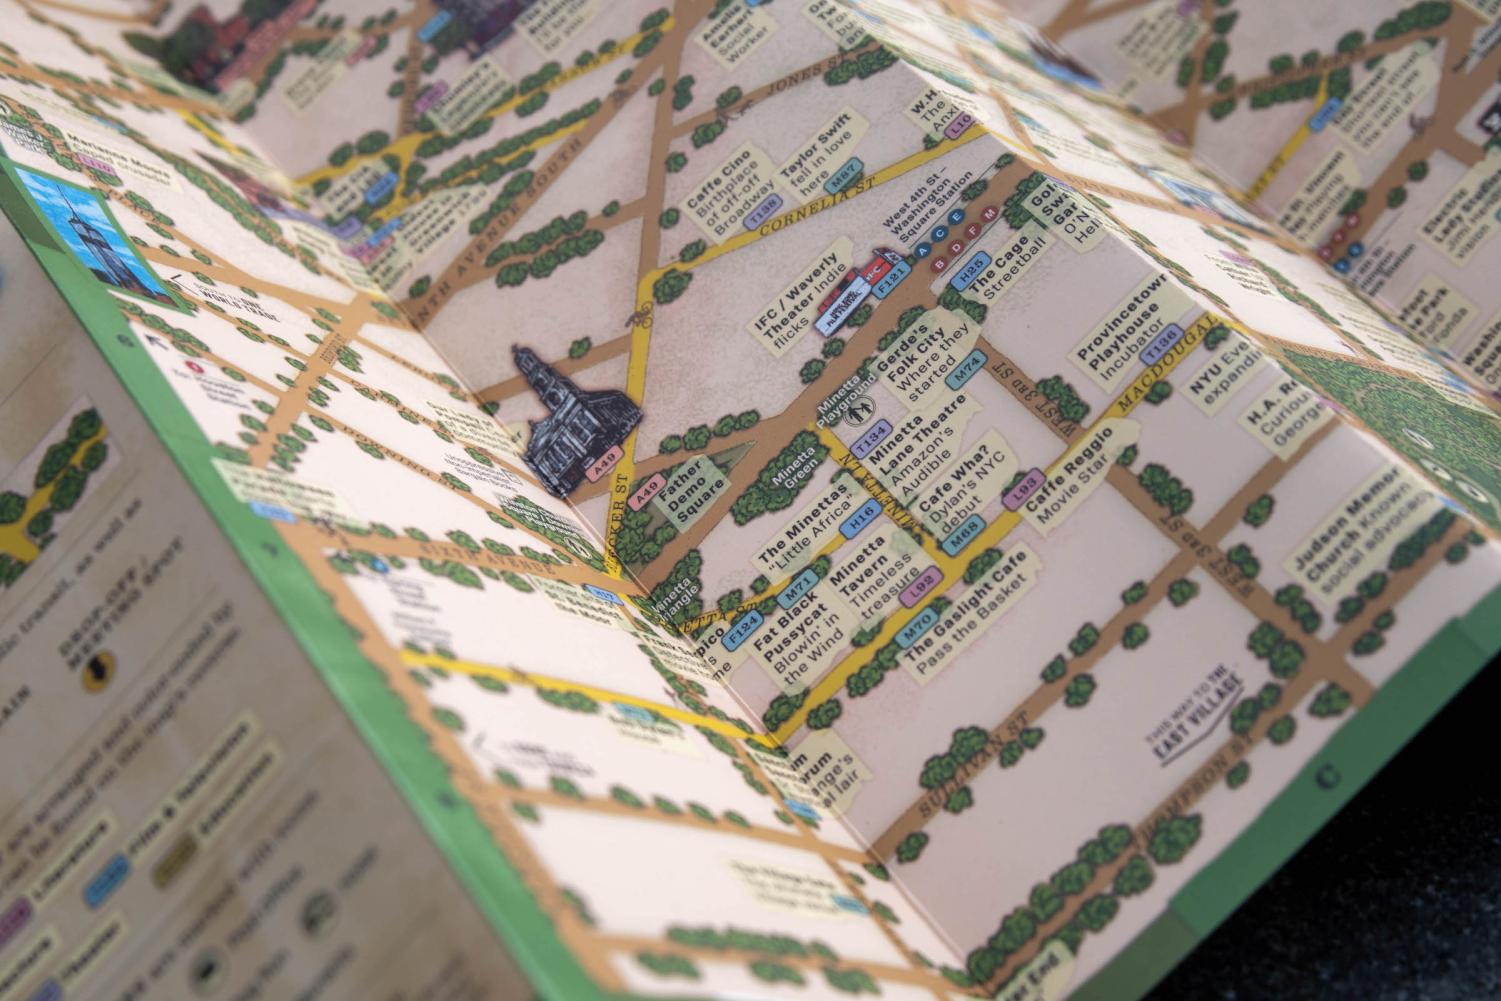 A close-up of a colorful, illustrated map of Greenwich Village in New York City.